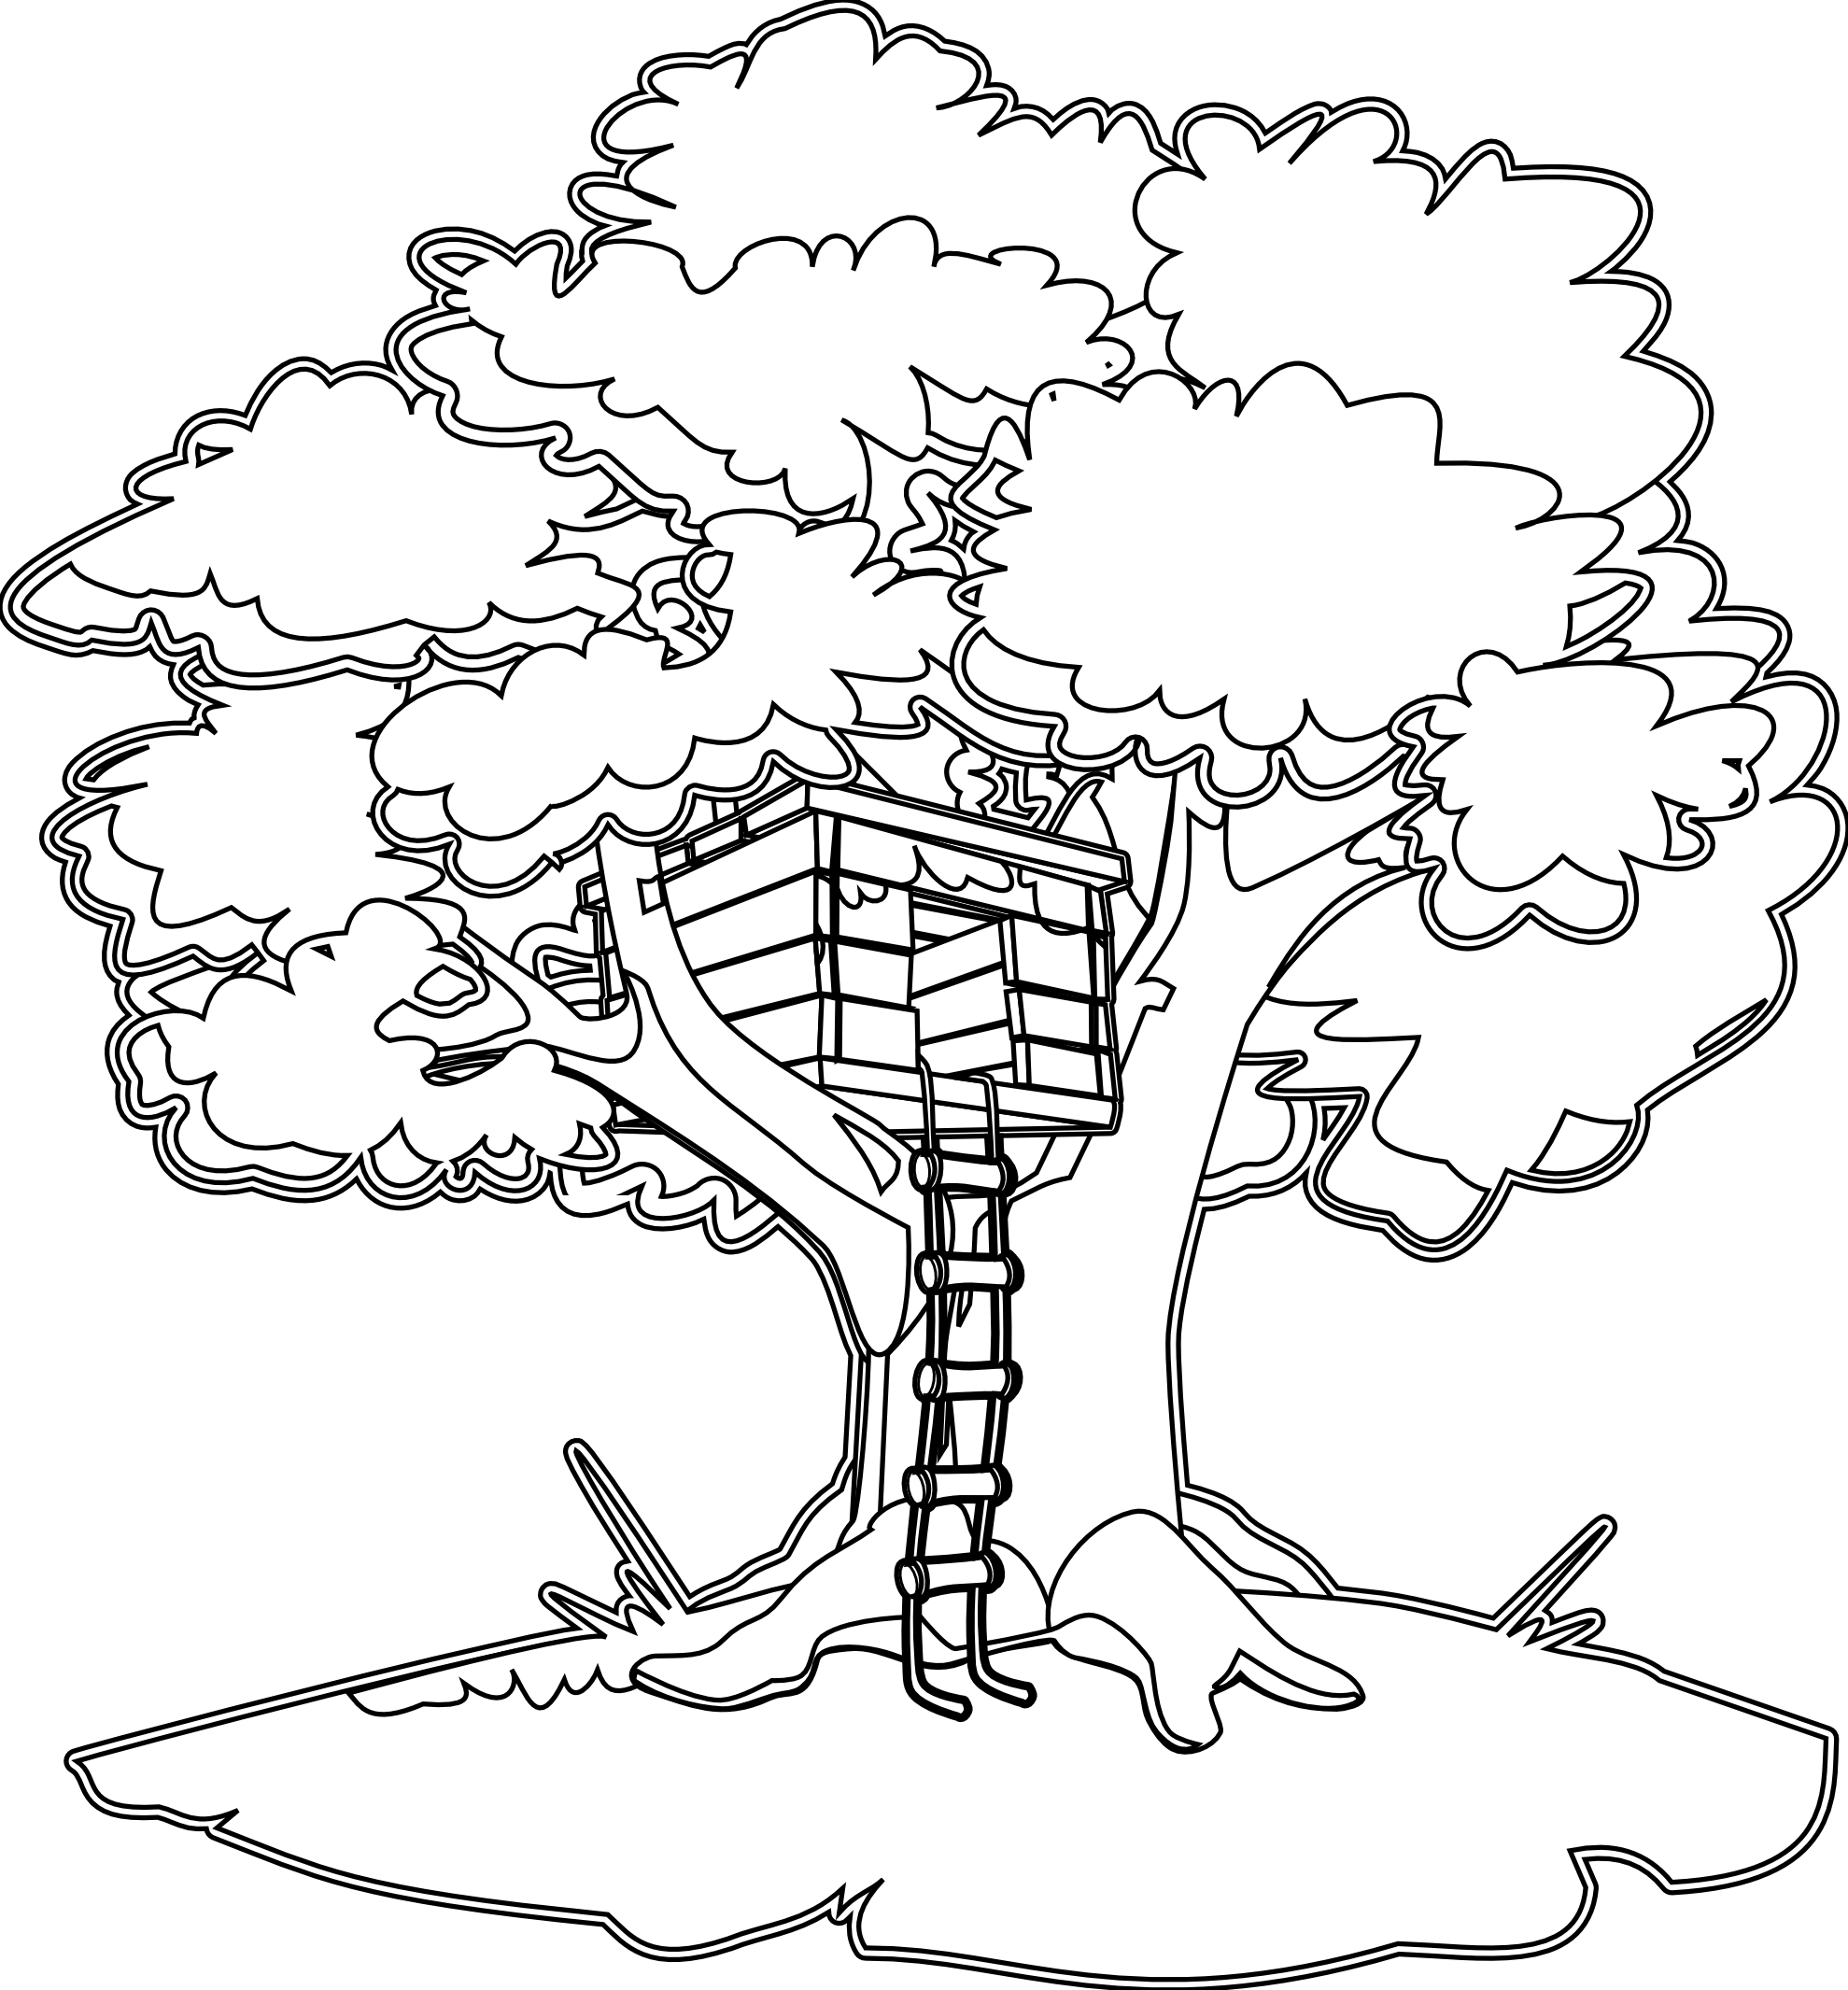 Drawing Tree #154800 (Nature) – Printable coloring pages